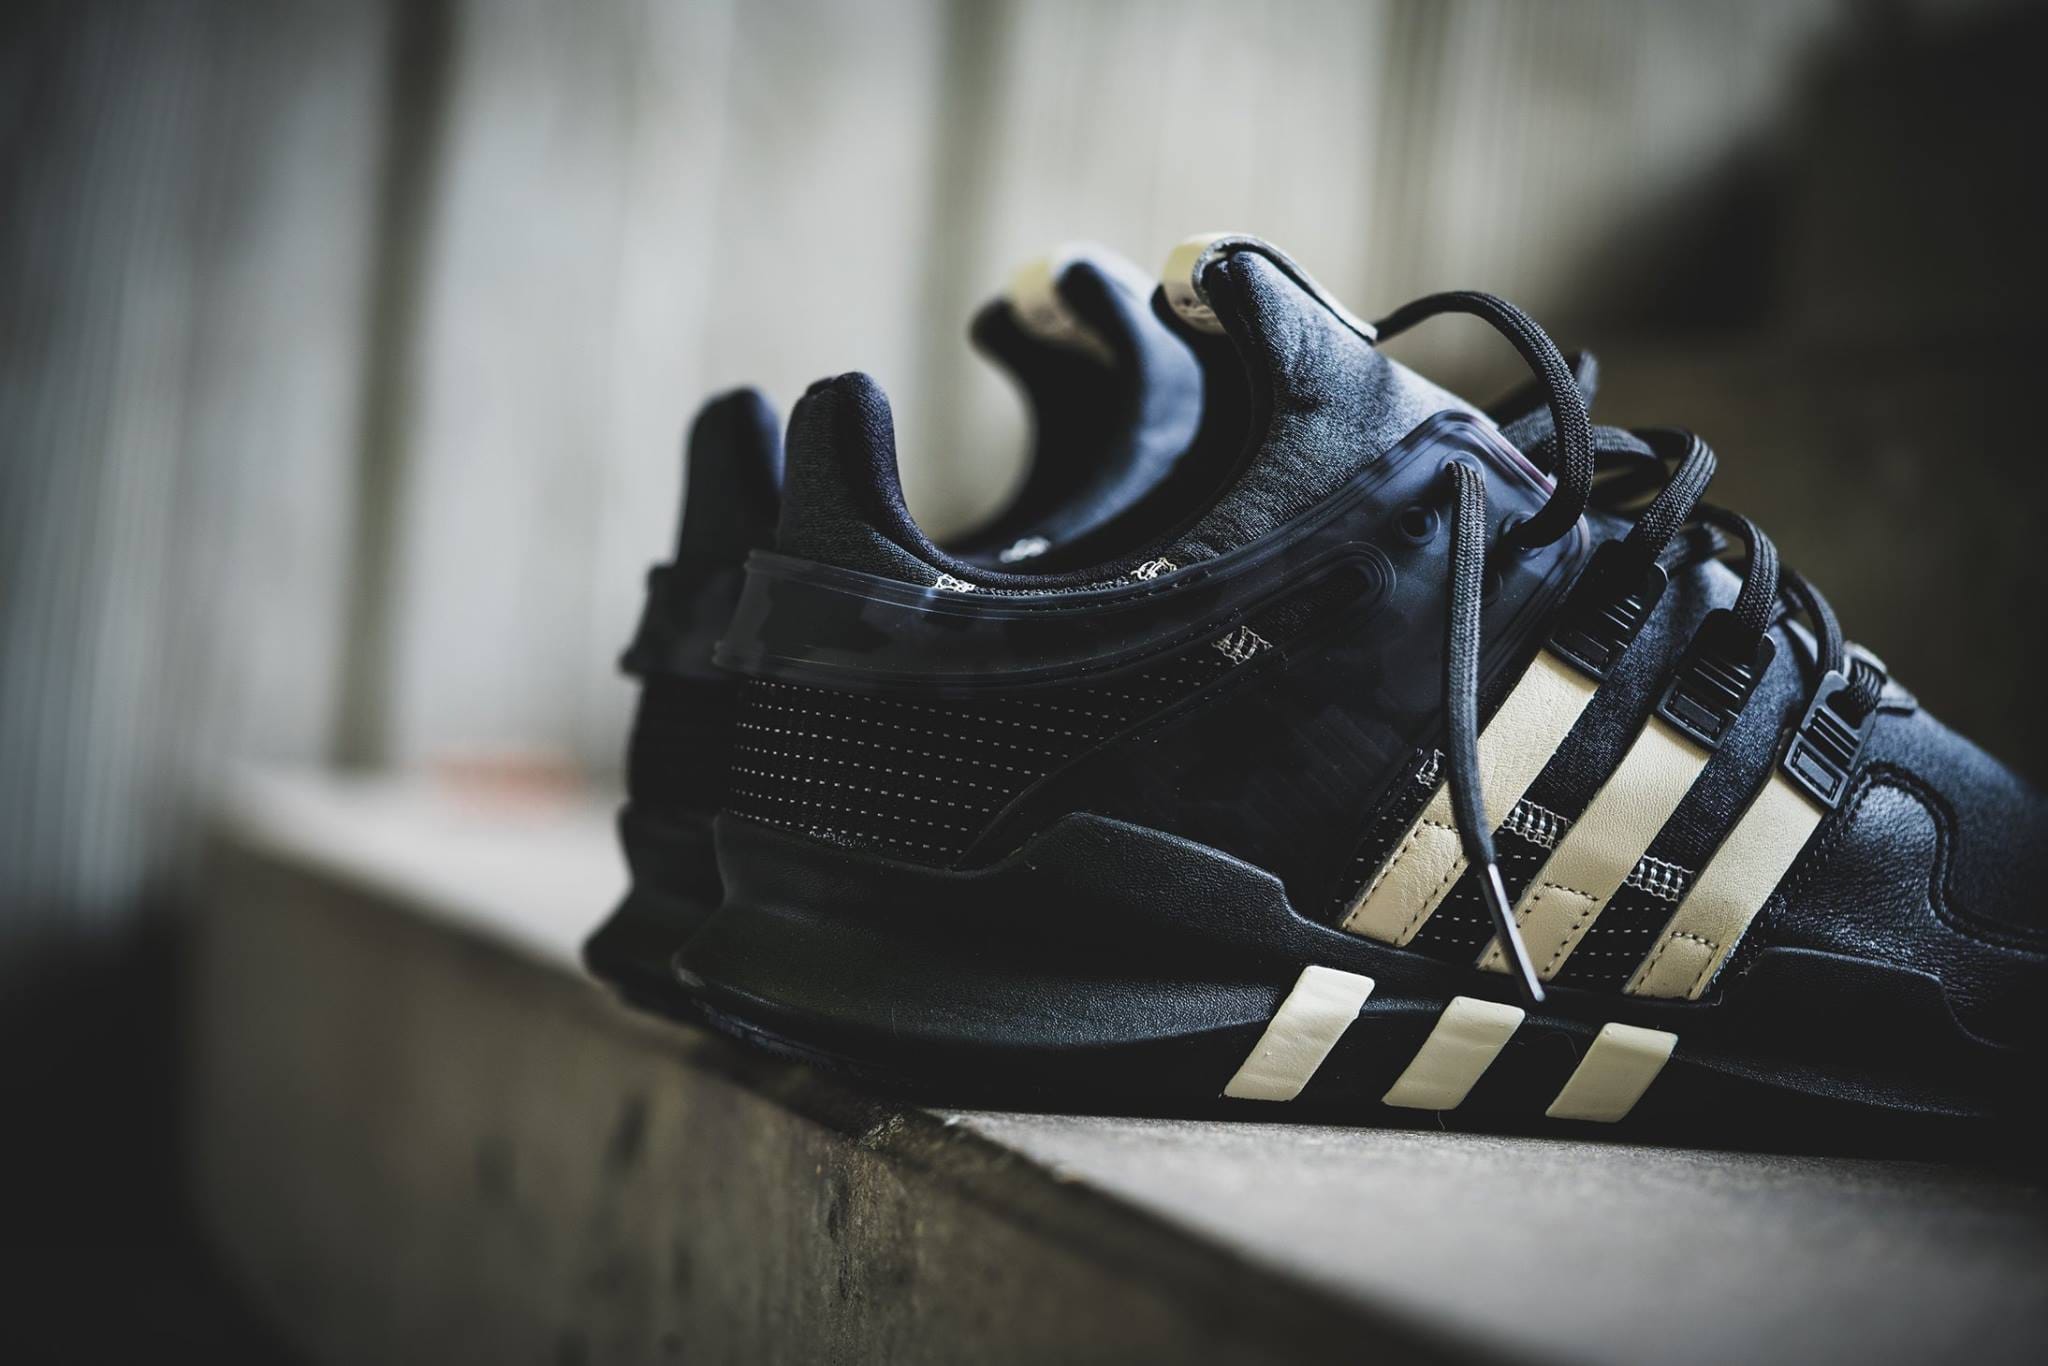 undefeated x adidas eqt adv support